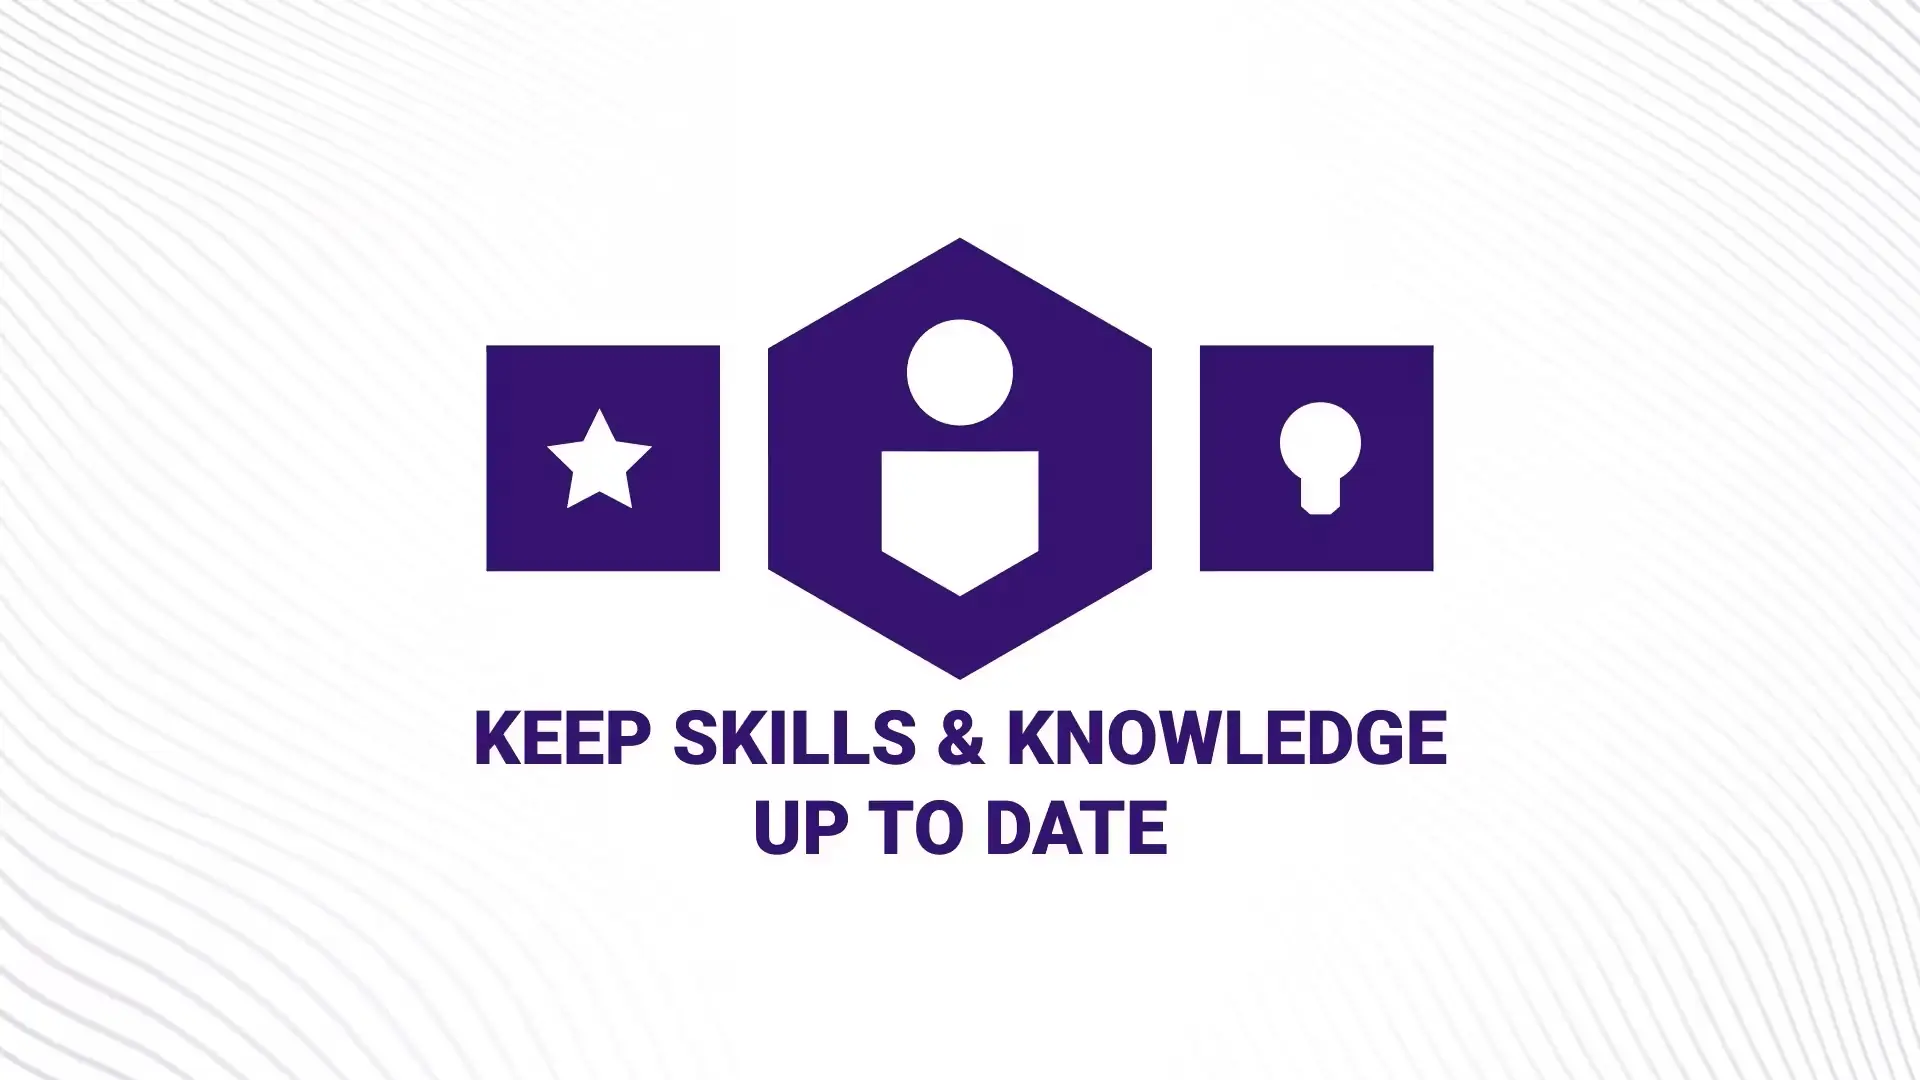 Keep Skills & Knowledge up to date